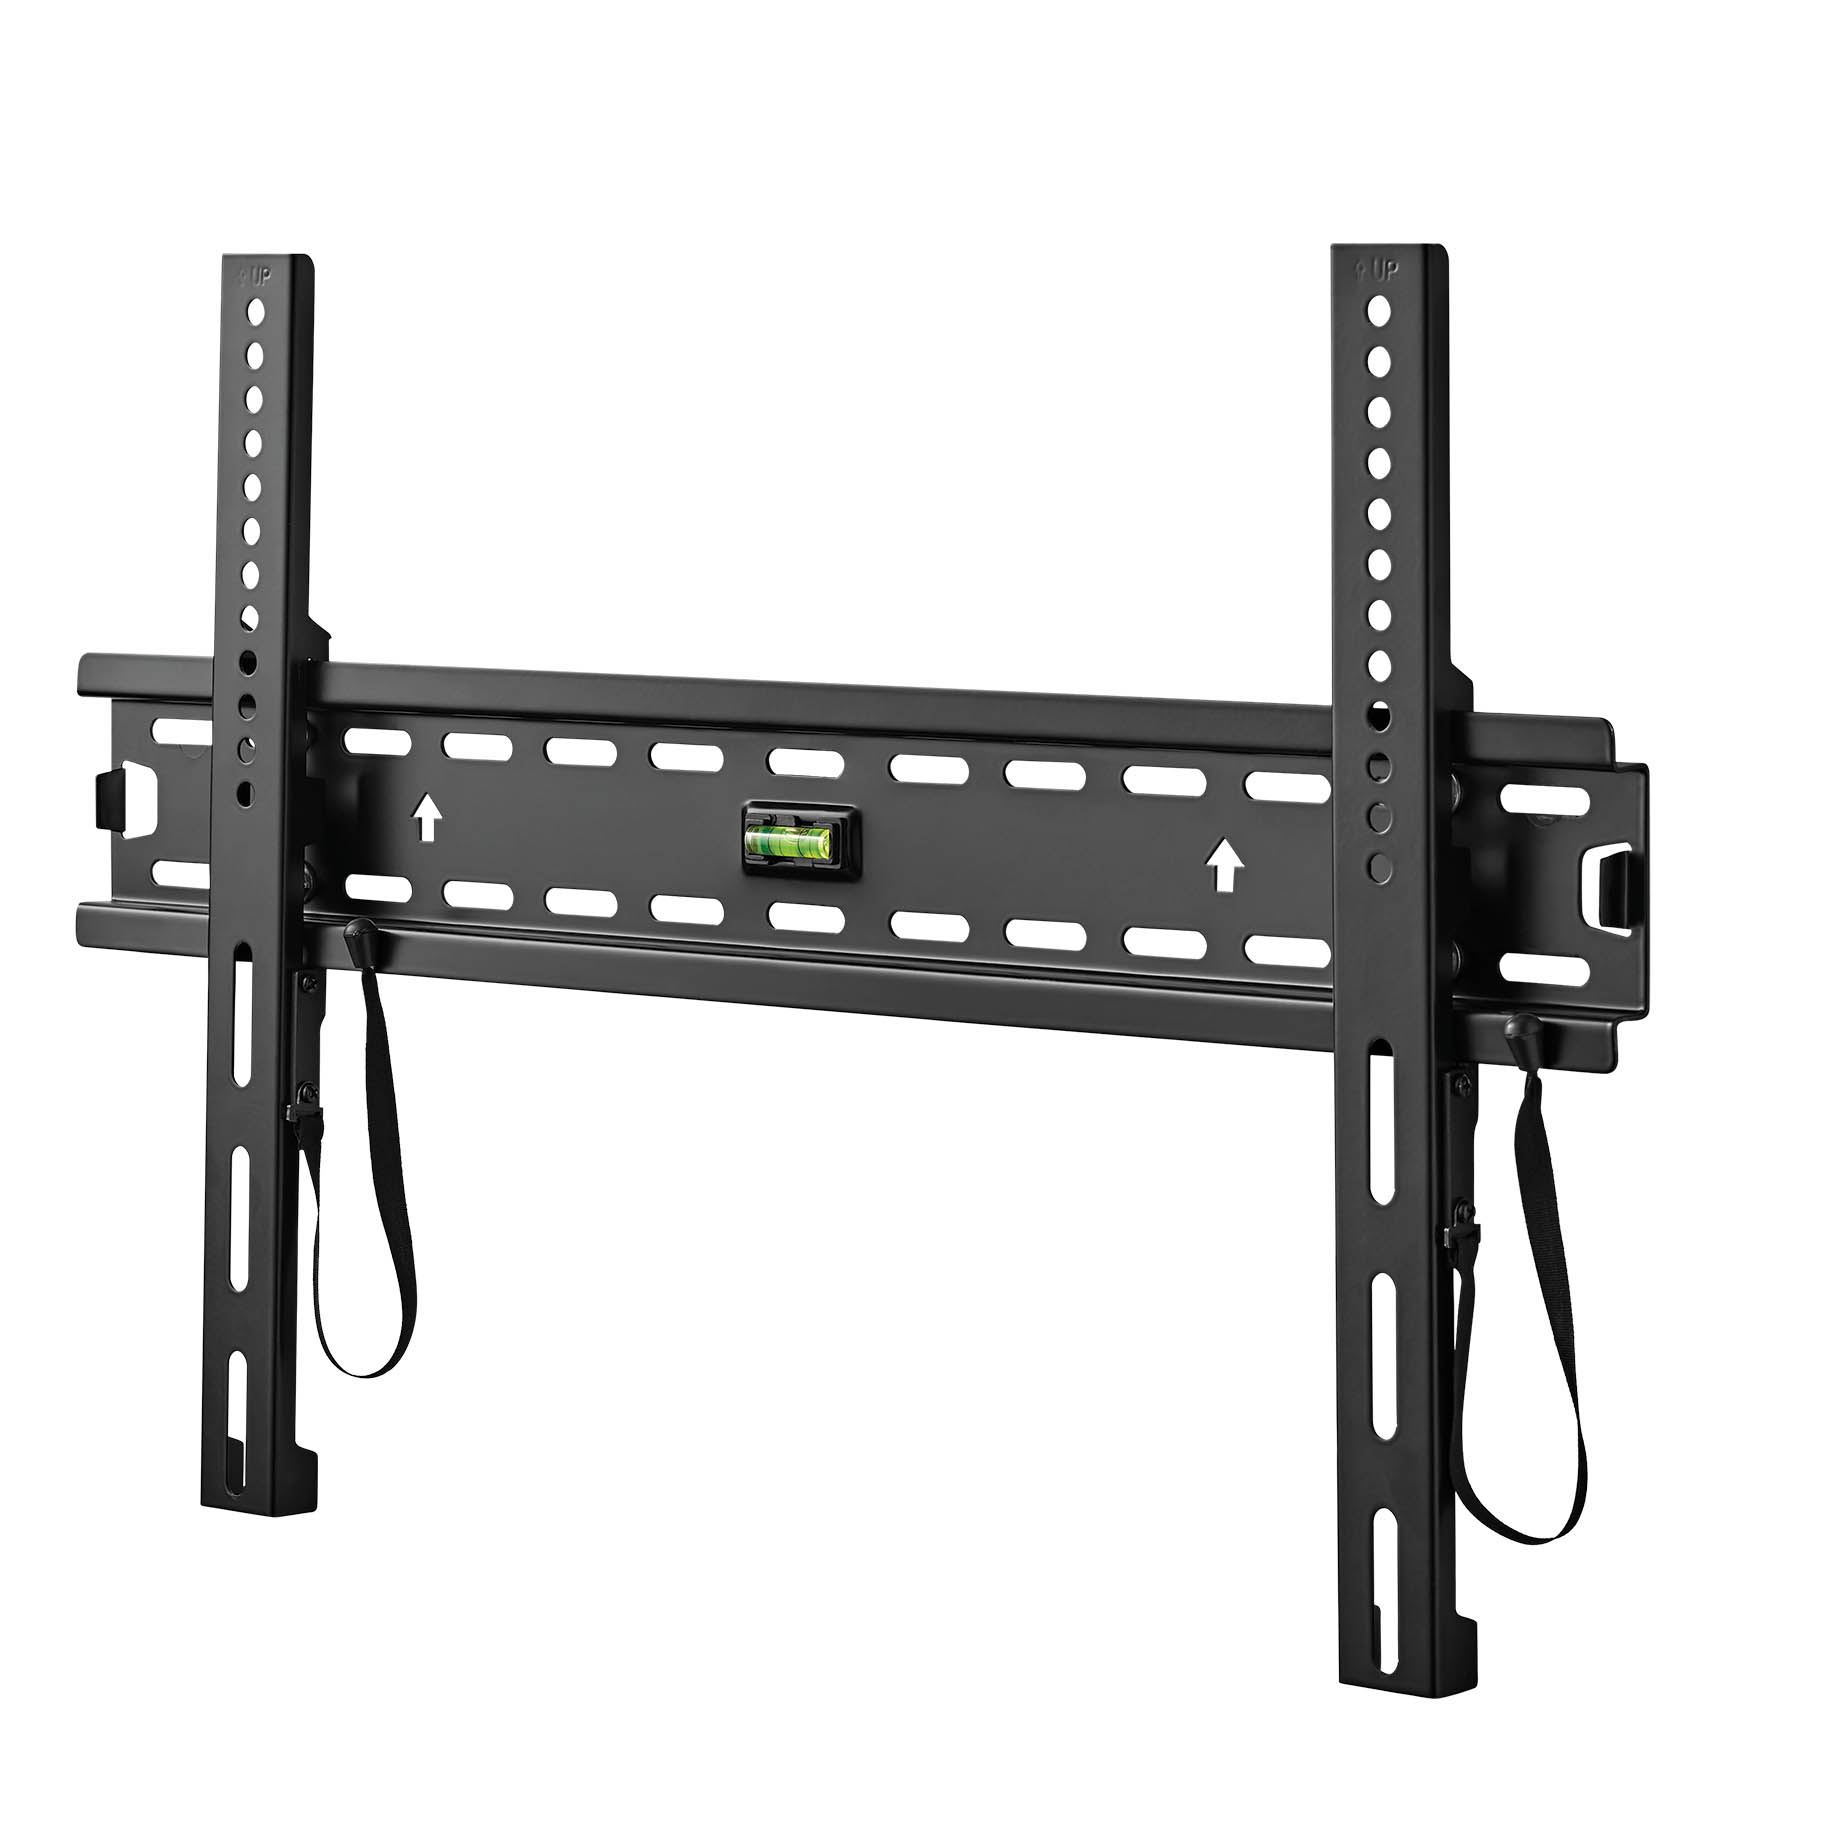 onn. Fixed TV Wall Mount for 32" to 86" TVs, holds up to 120 lbs - image 1 of 13